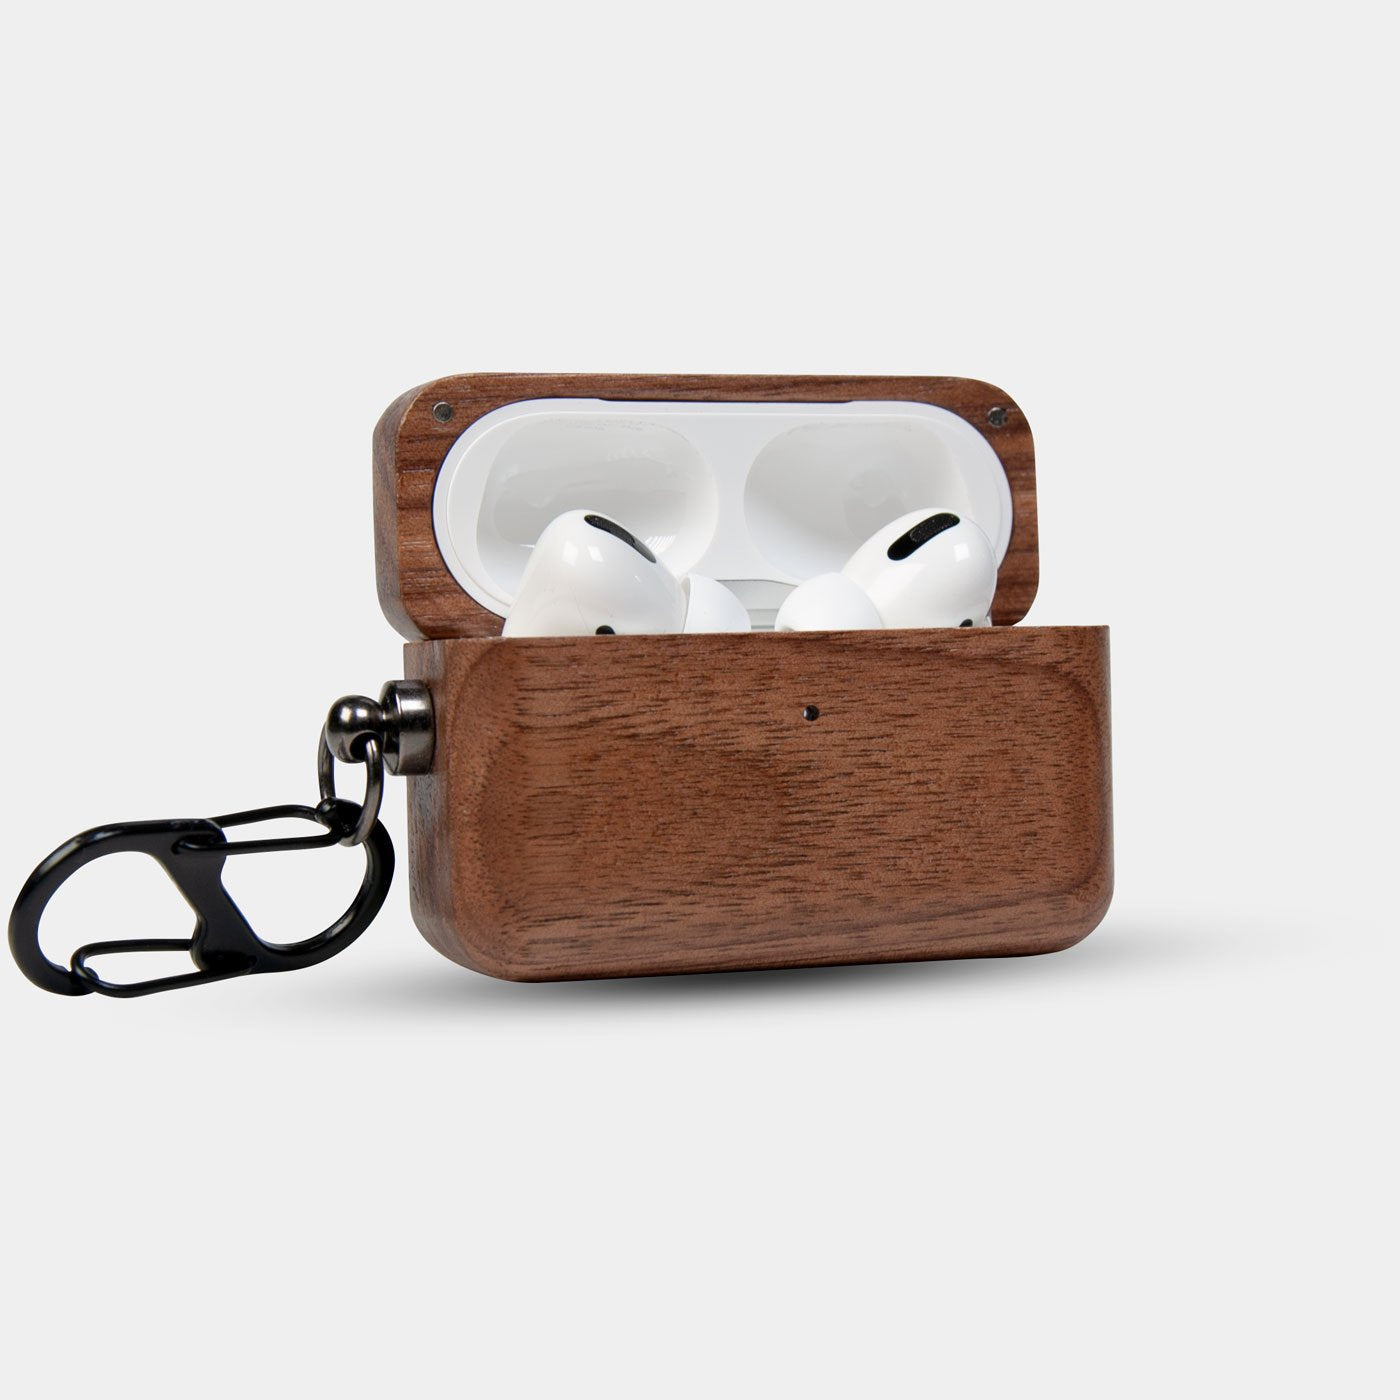 Custom Indianapolis Colts AirPods Cases | AirPods | AirPods Pro - Carved Wood Colts AirPods Cover